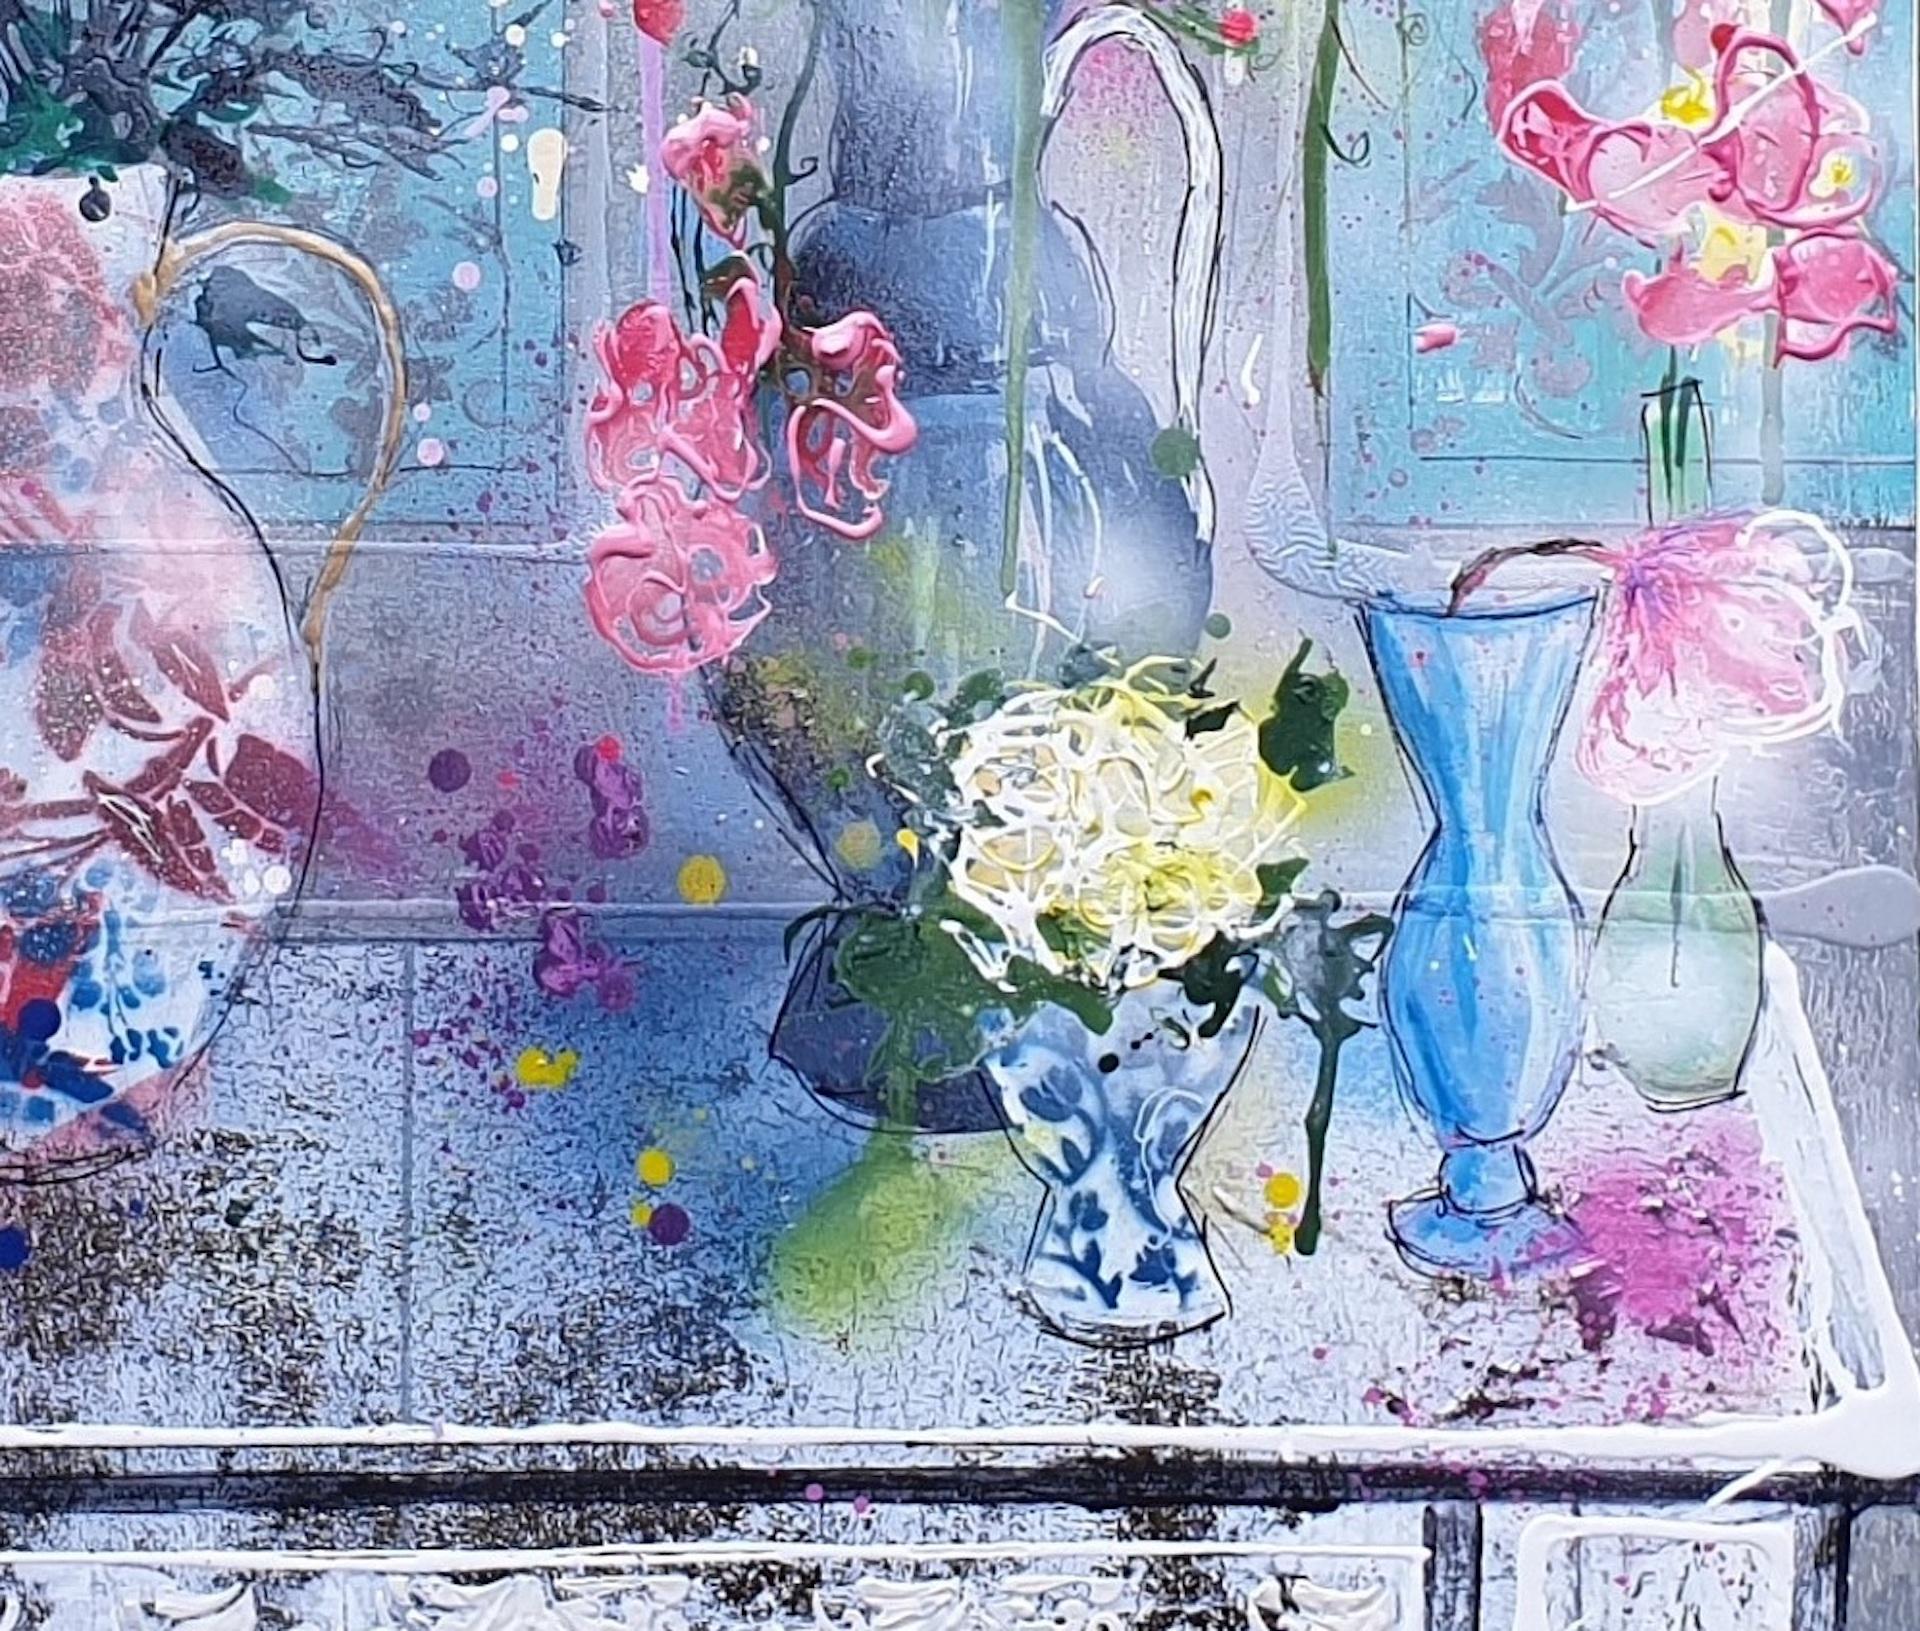 Julia Adams
#ihavethisthingwithflowers
Original Interior Painting
Mixed Media on Canvas
Canvas Size: H 80cm x W 80cm
Framed Size: H 81.5cm x W 81.5cm x D 3.5cm
Sold Framed in a White Wooden Float Frame
Please note that insitu images are purely an